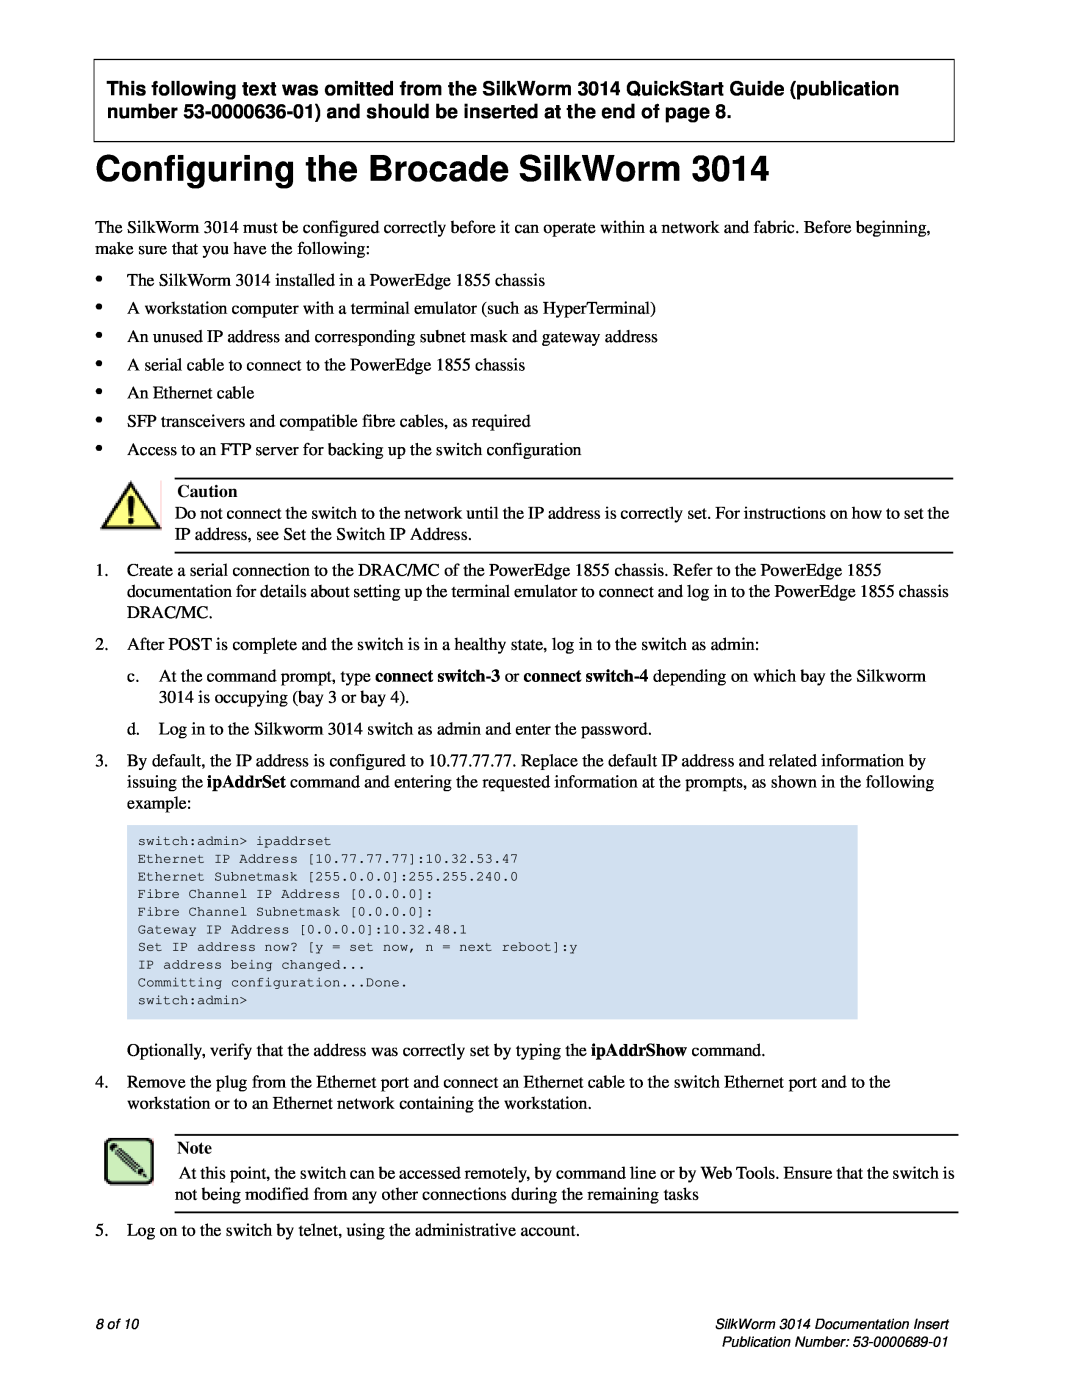 Brocade Communications Systems 3014 Configuring the Brocade SilkWorm, Committing configuration...Done. switchadmin 